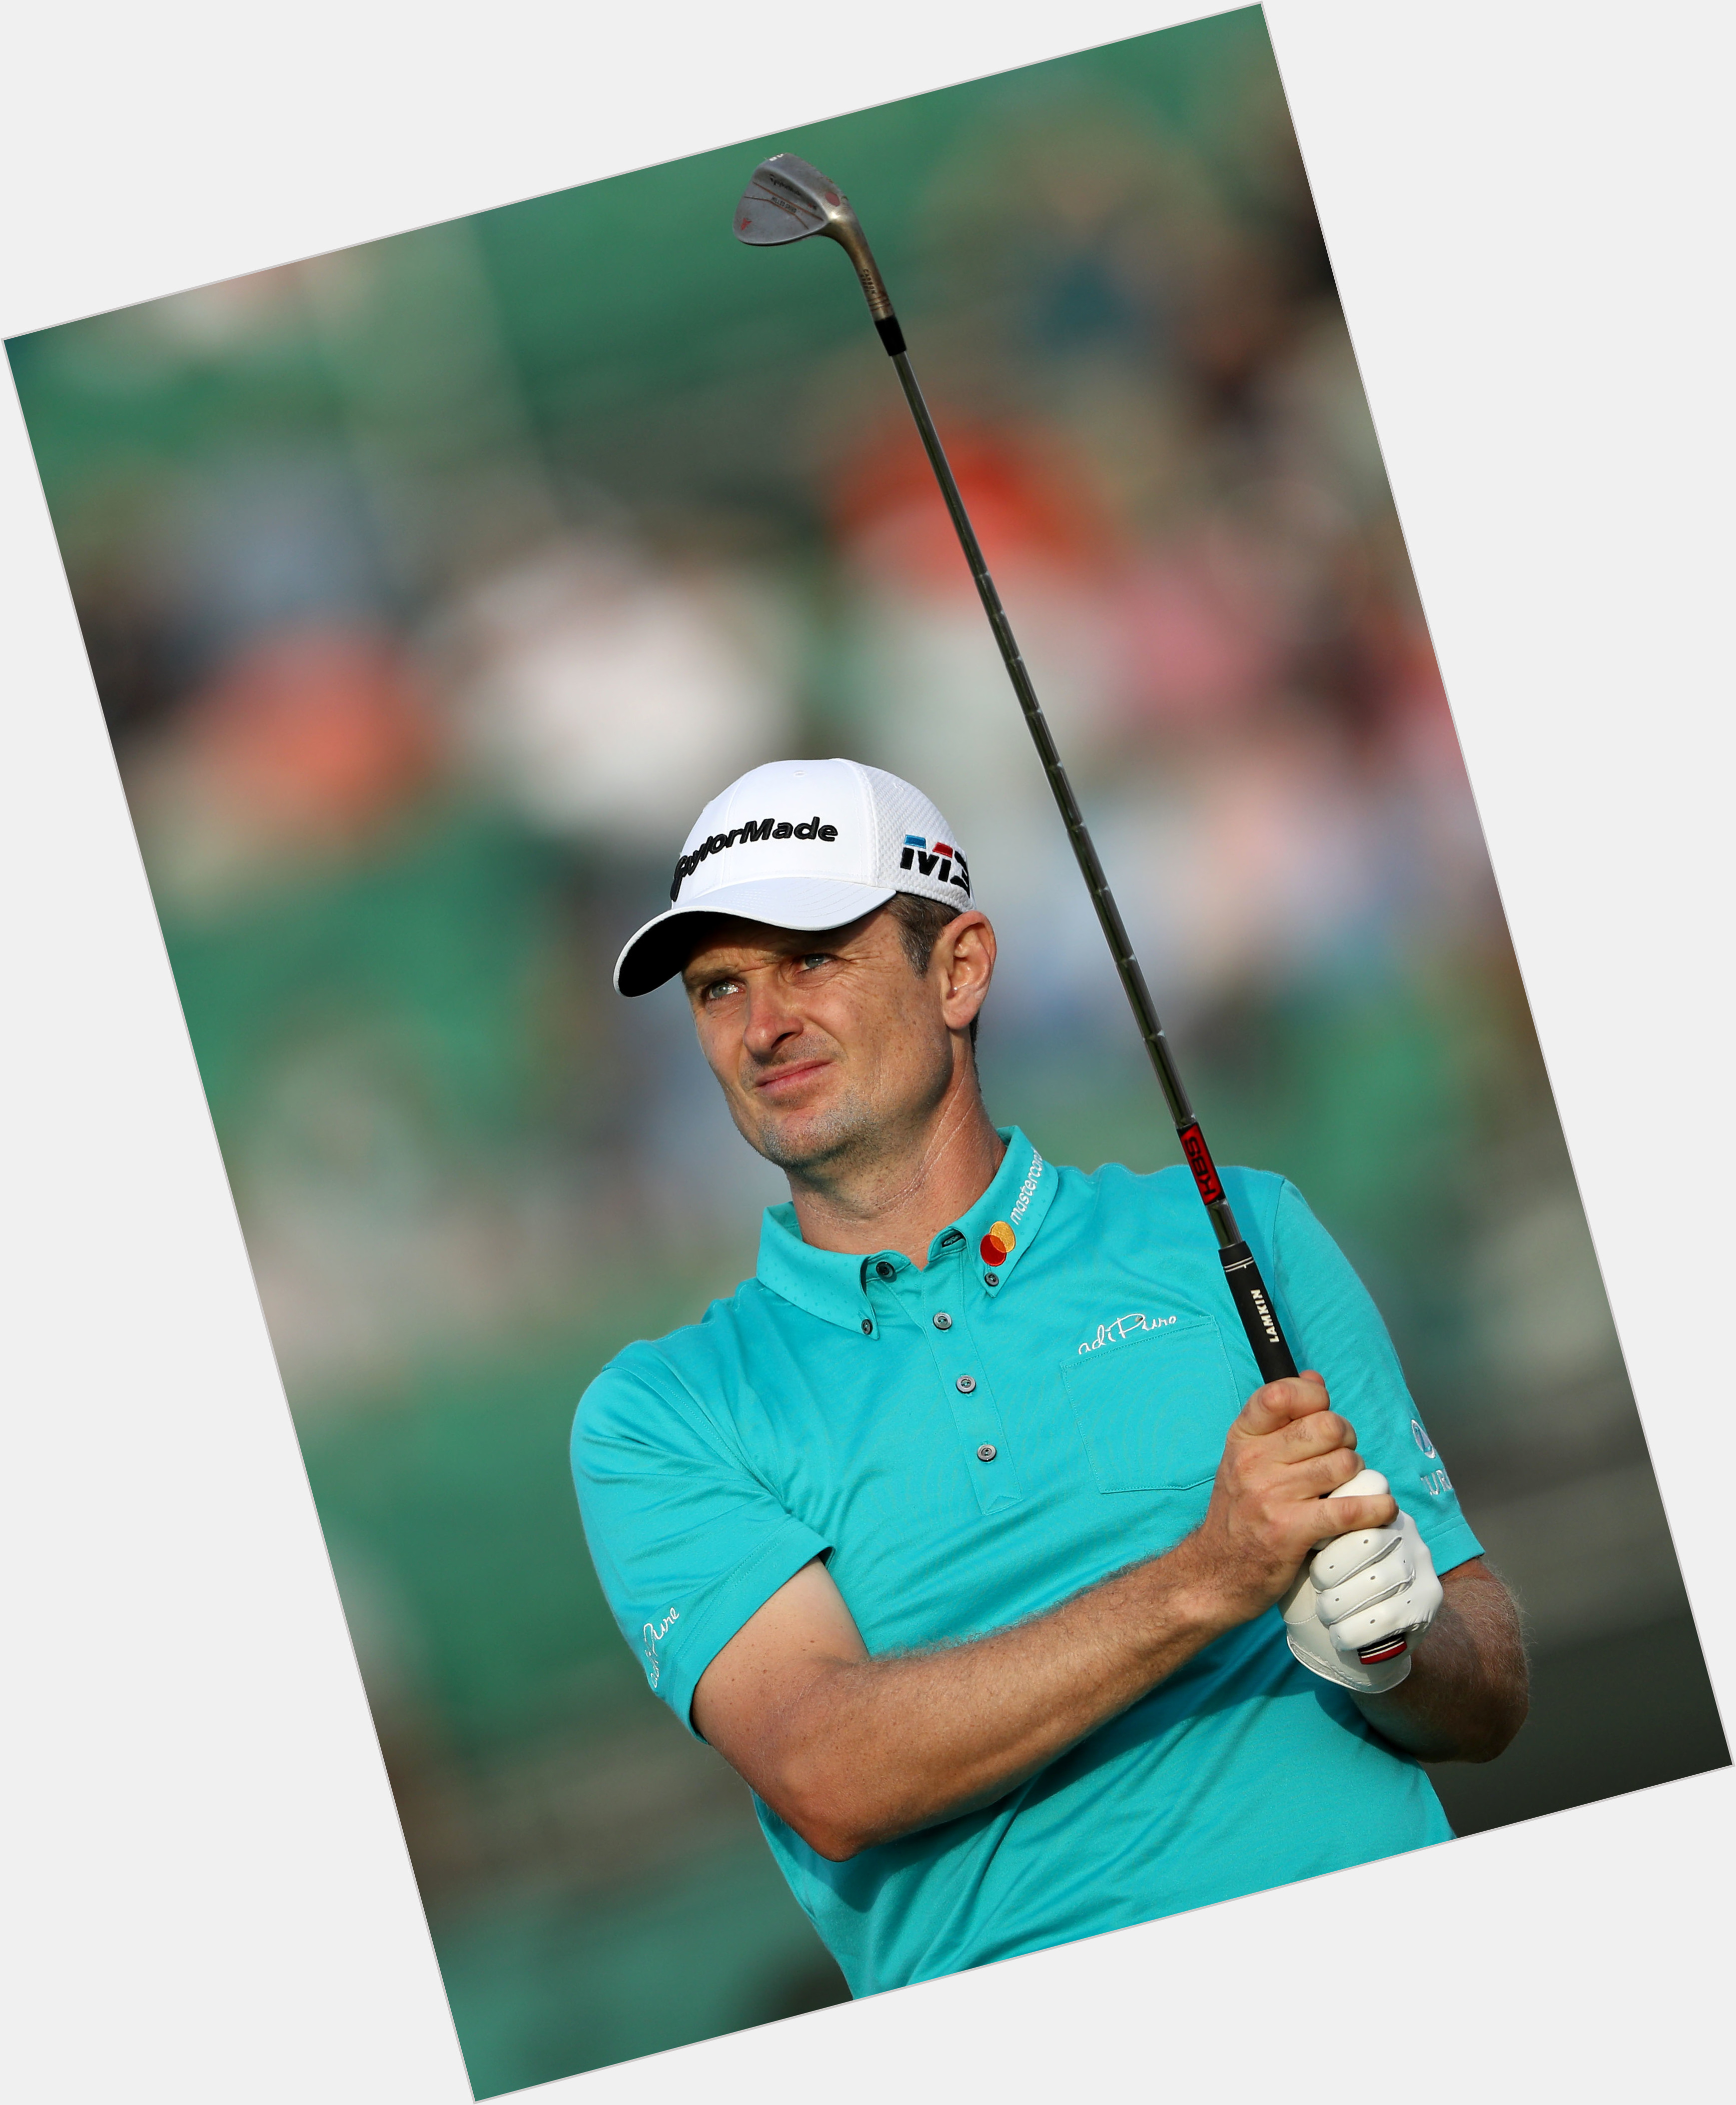 <a href="/hot-men/justin-rose/where-dating-news-photos">Justin Rose</a>  